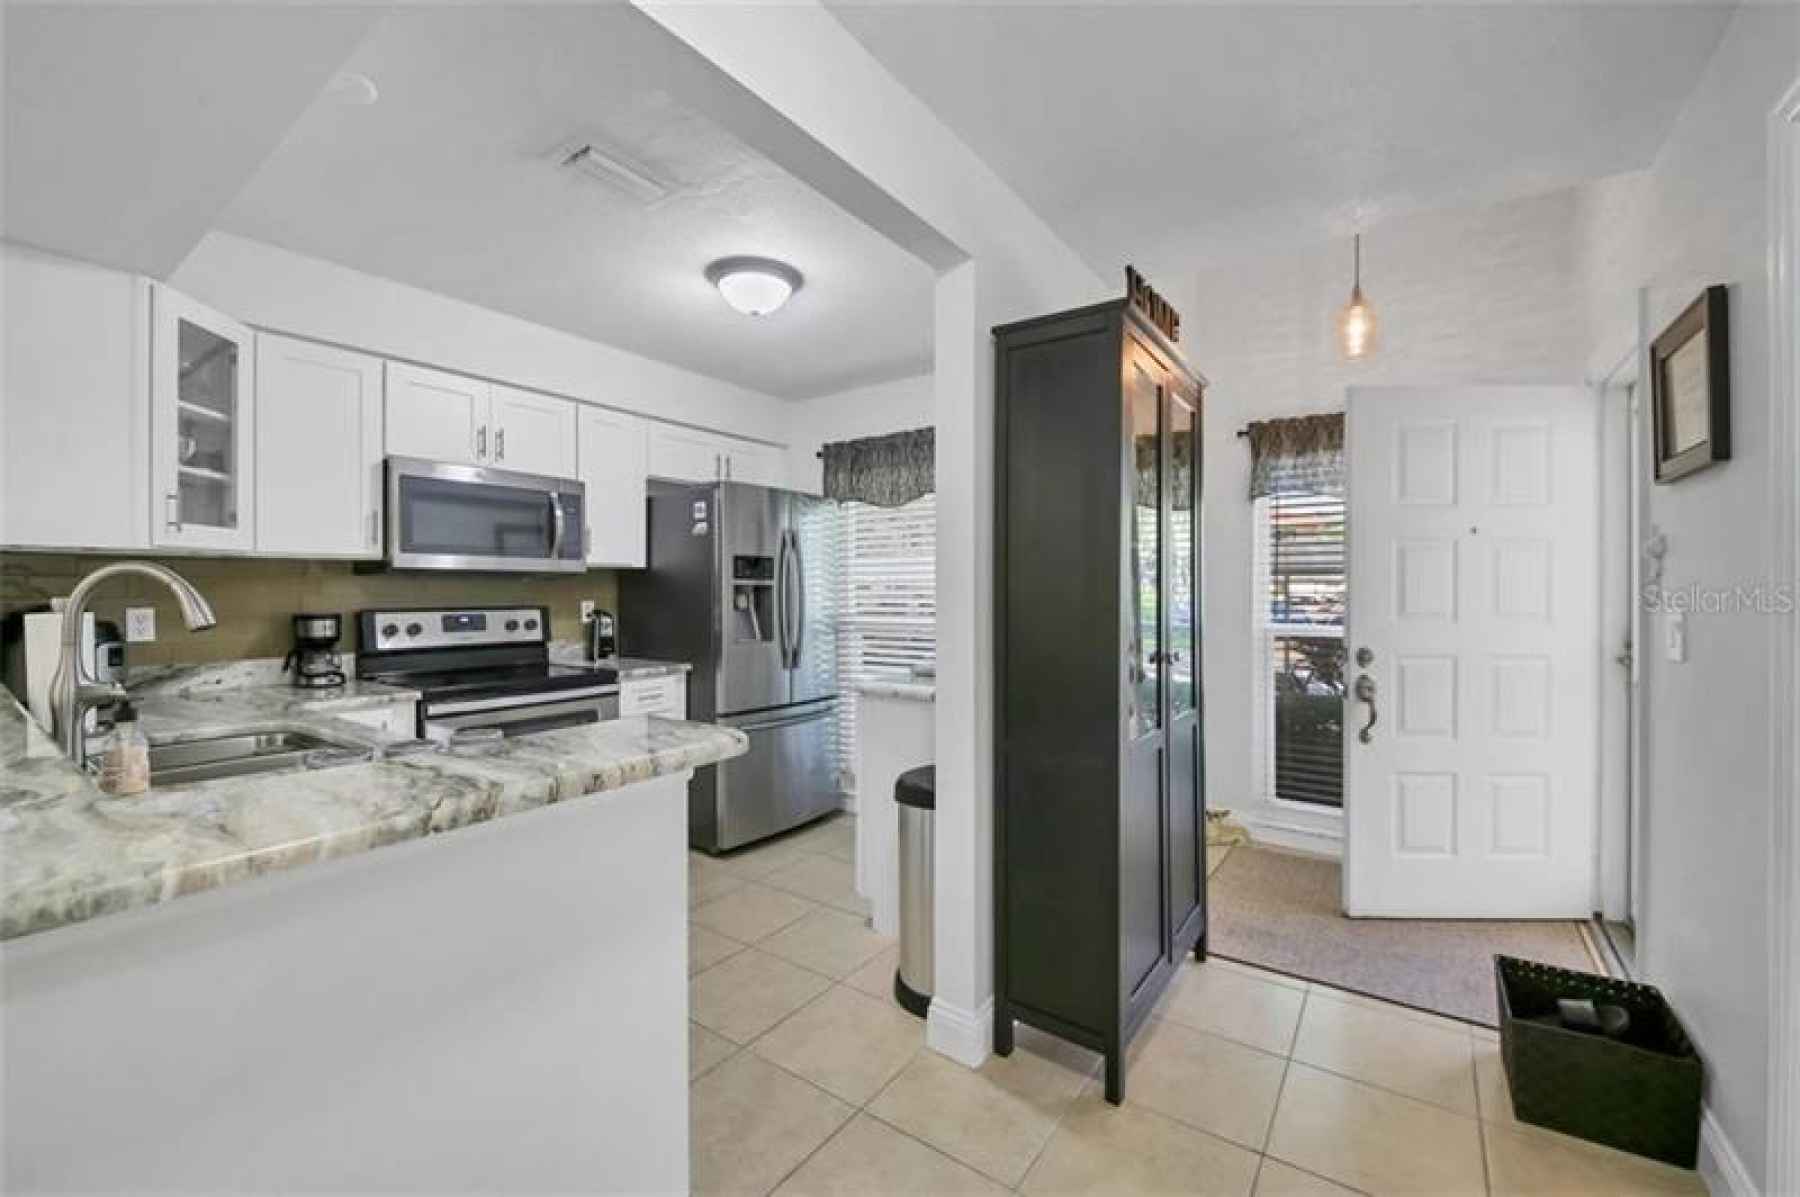 Clean, fully remodeled kitchen and those amazing counters!!!!